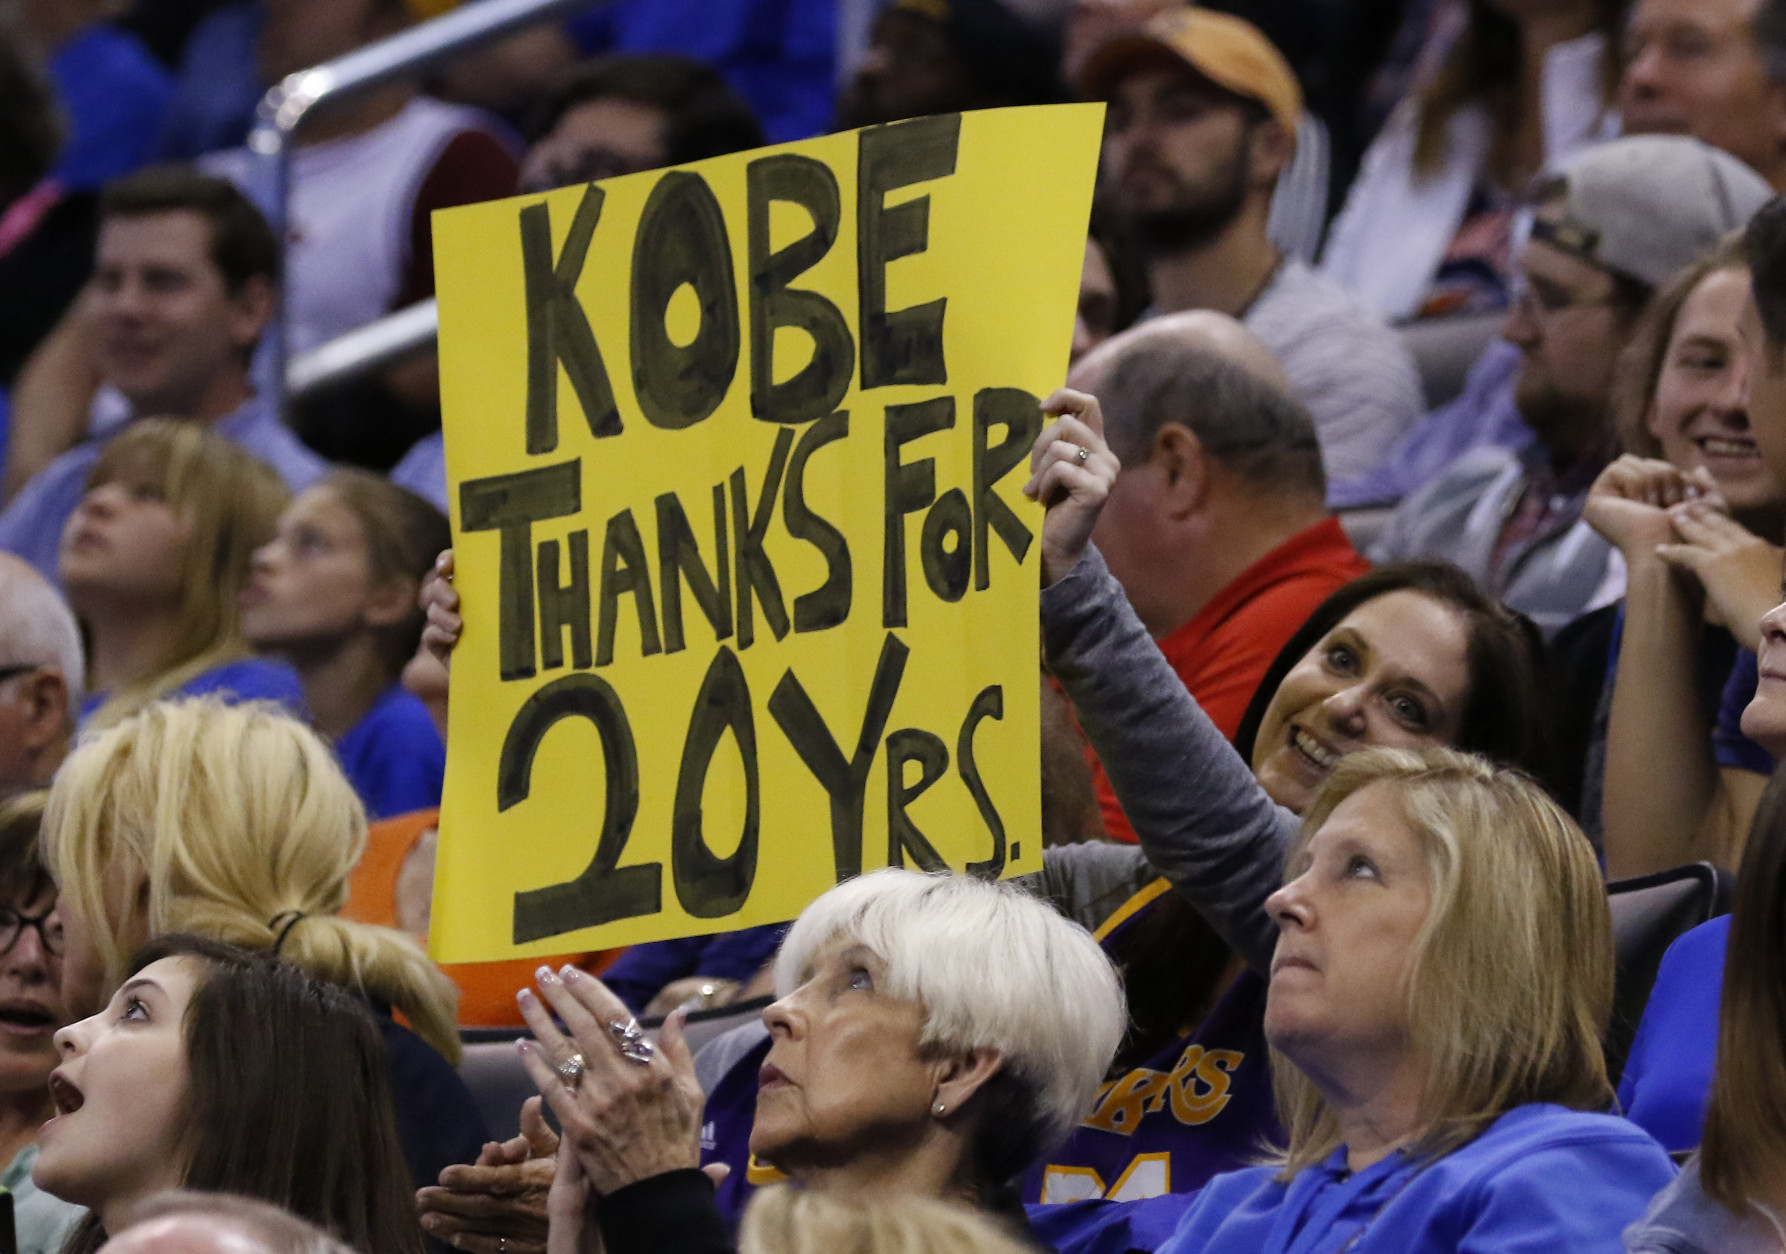 A Kobe Bryant fan holds a sign thanking him for his 20 years during the first half of an NBA basketball game in Oklahoma City, Monday, April 11, 2016. (AP Photo/Alonzo Adams)